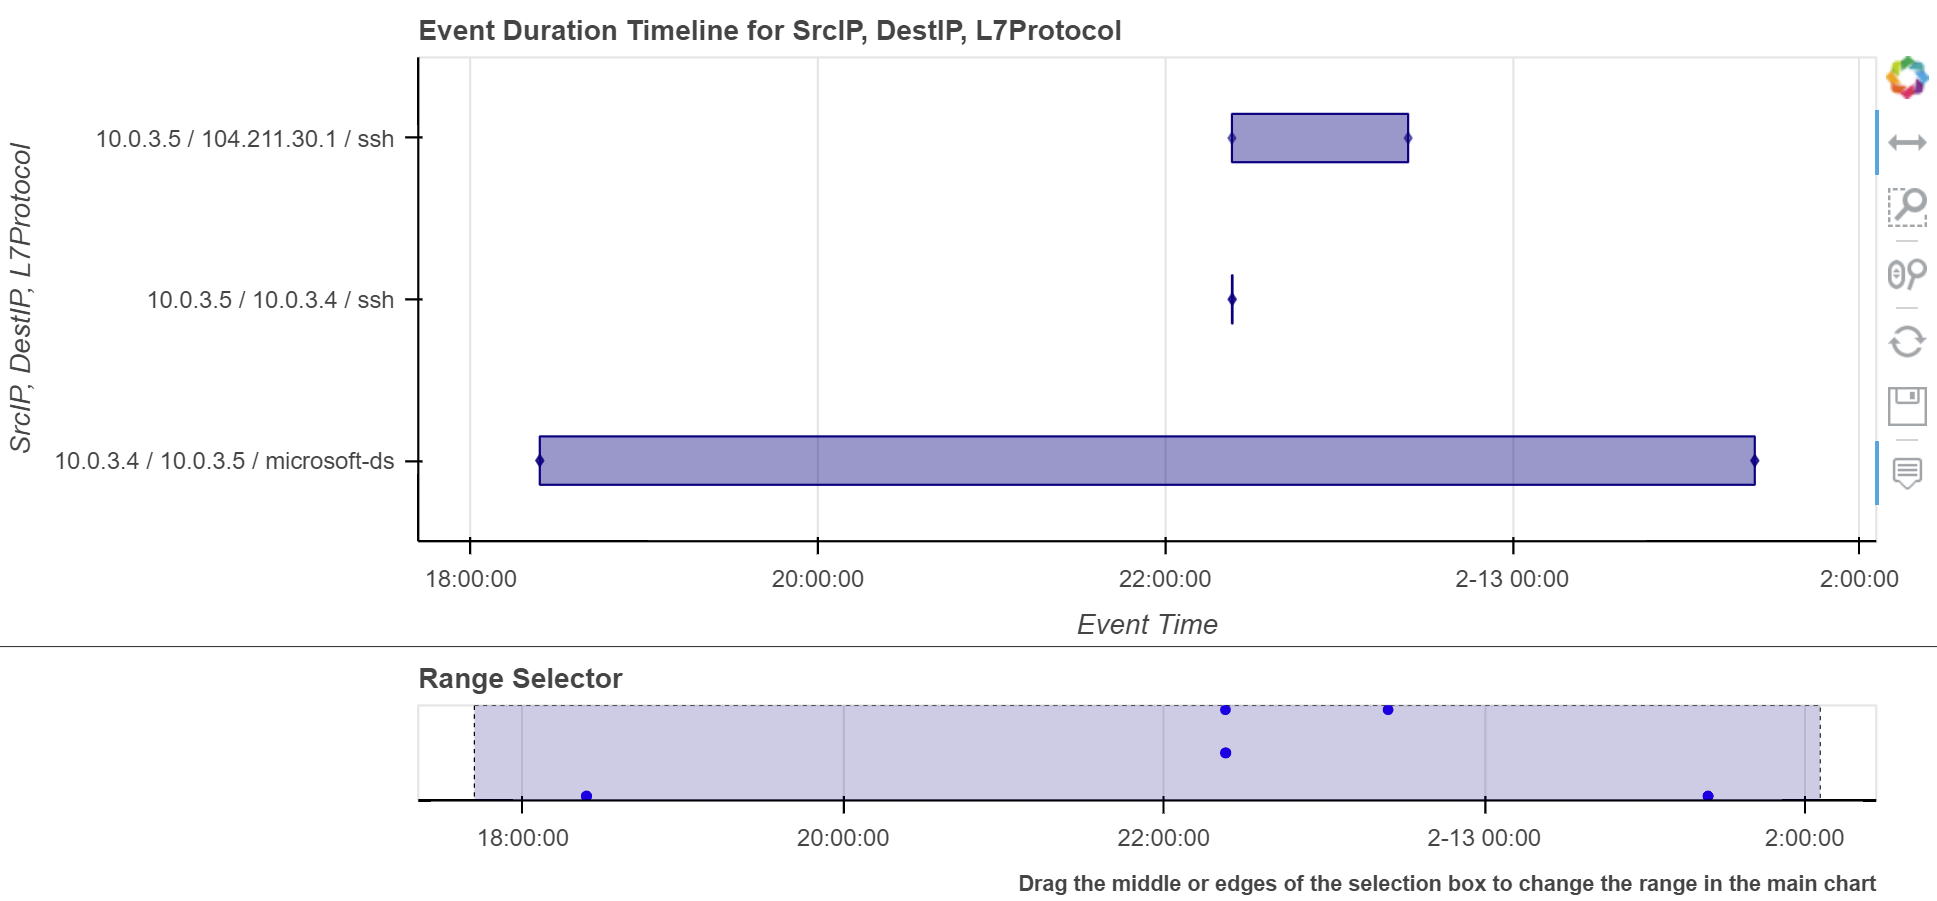 Timeline duration for IP addresses showing bands for start and end of event groups.